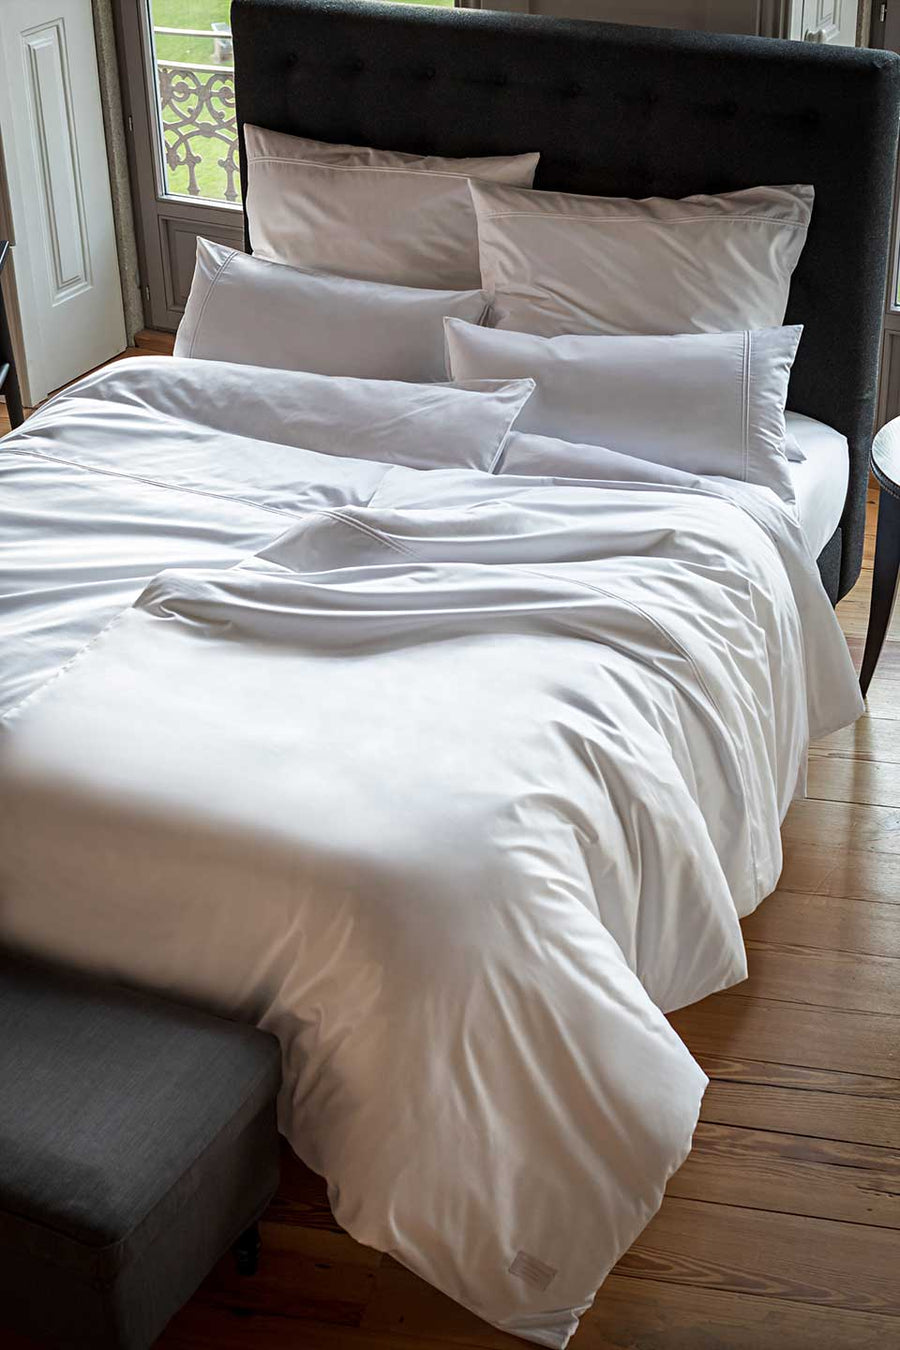 Bed with white Egyptian Cotton™ Sateen bedding.